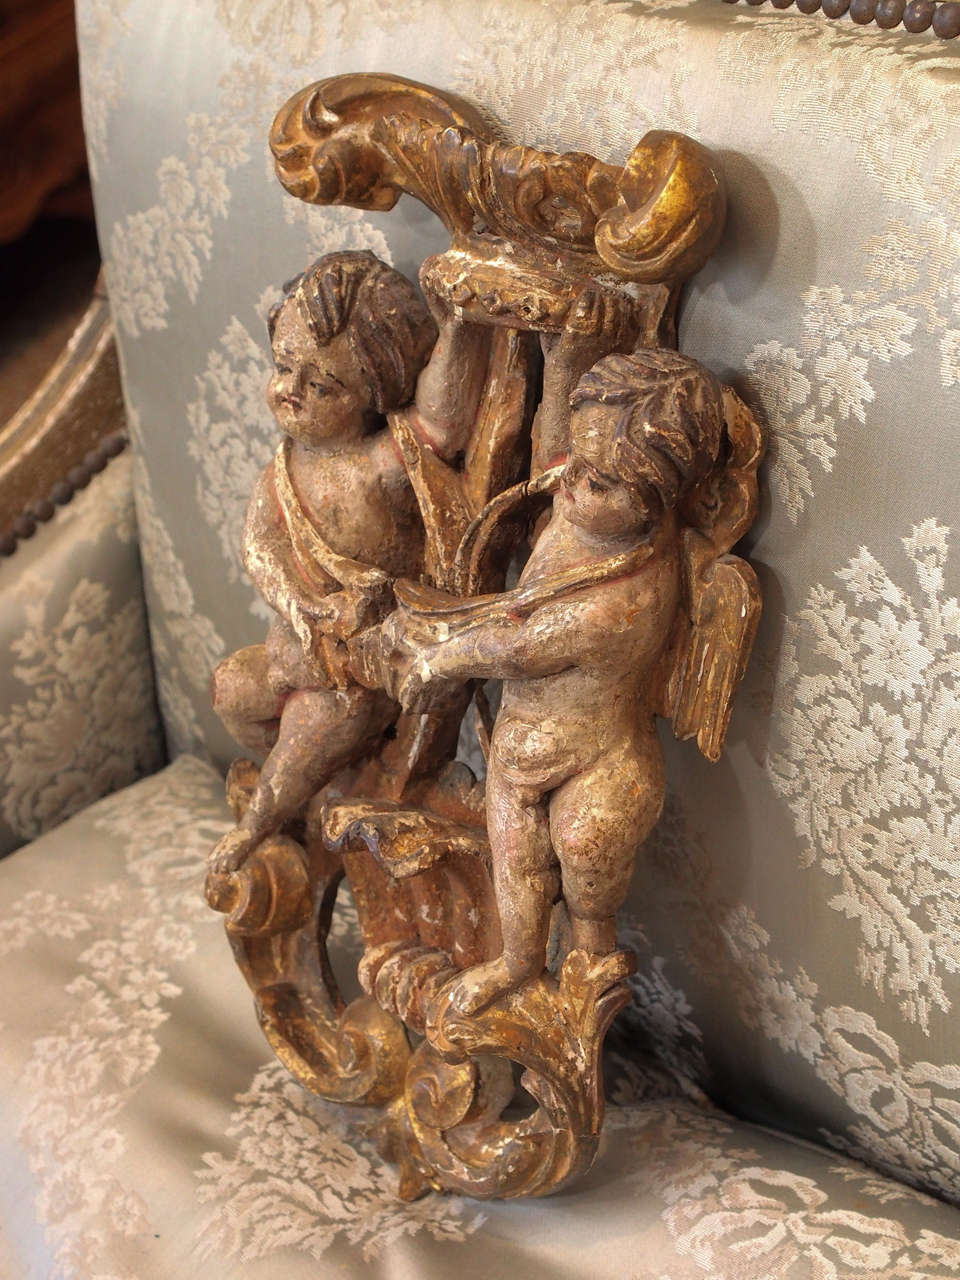 Fabulous polychrome carving of two putti standing on a gilt foliate garland, between a shell, holding a gilt crown.  Gilt is still visible but only a few spots
of paint remain.